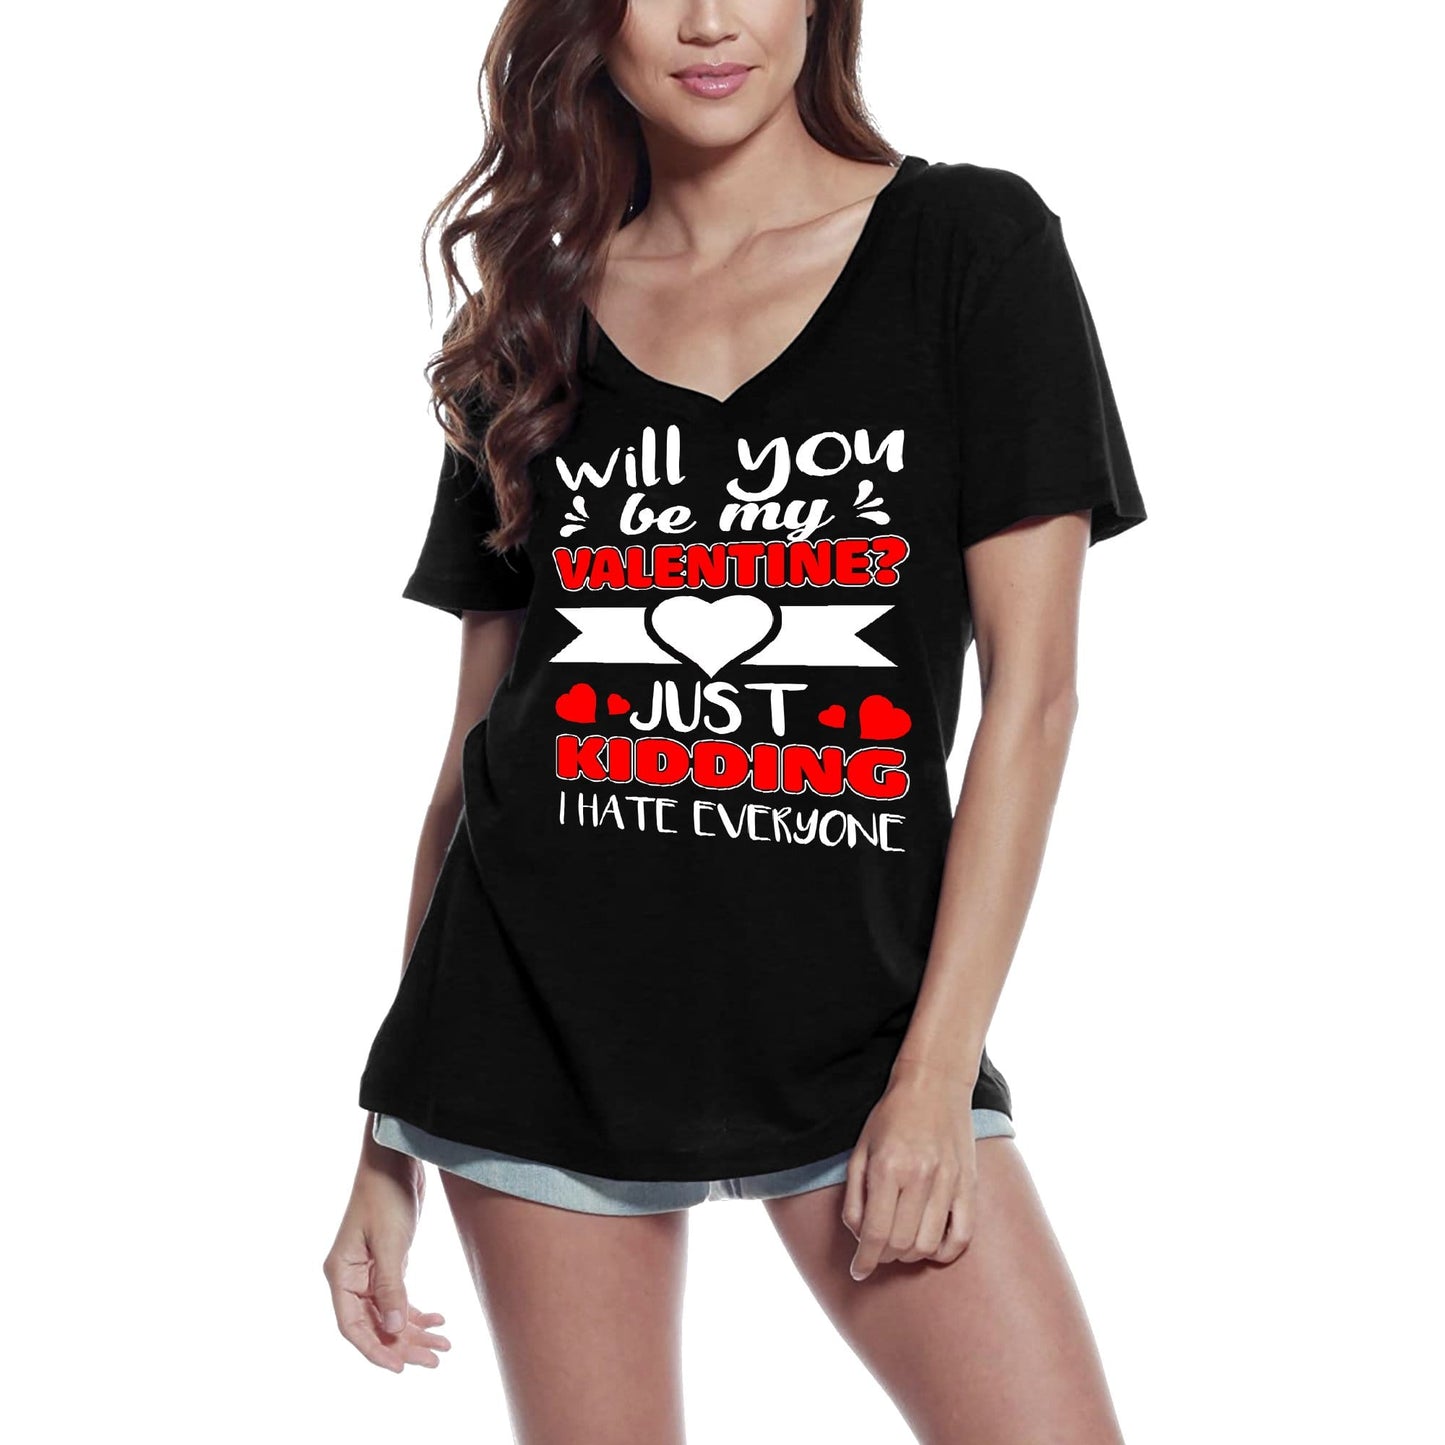 ULTRABASIC Women's T-Shirt Will You Be My Valentine - Valentine's Day Short Sleeve Graphic Tees Tops